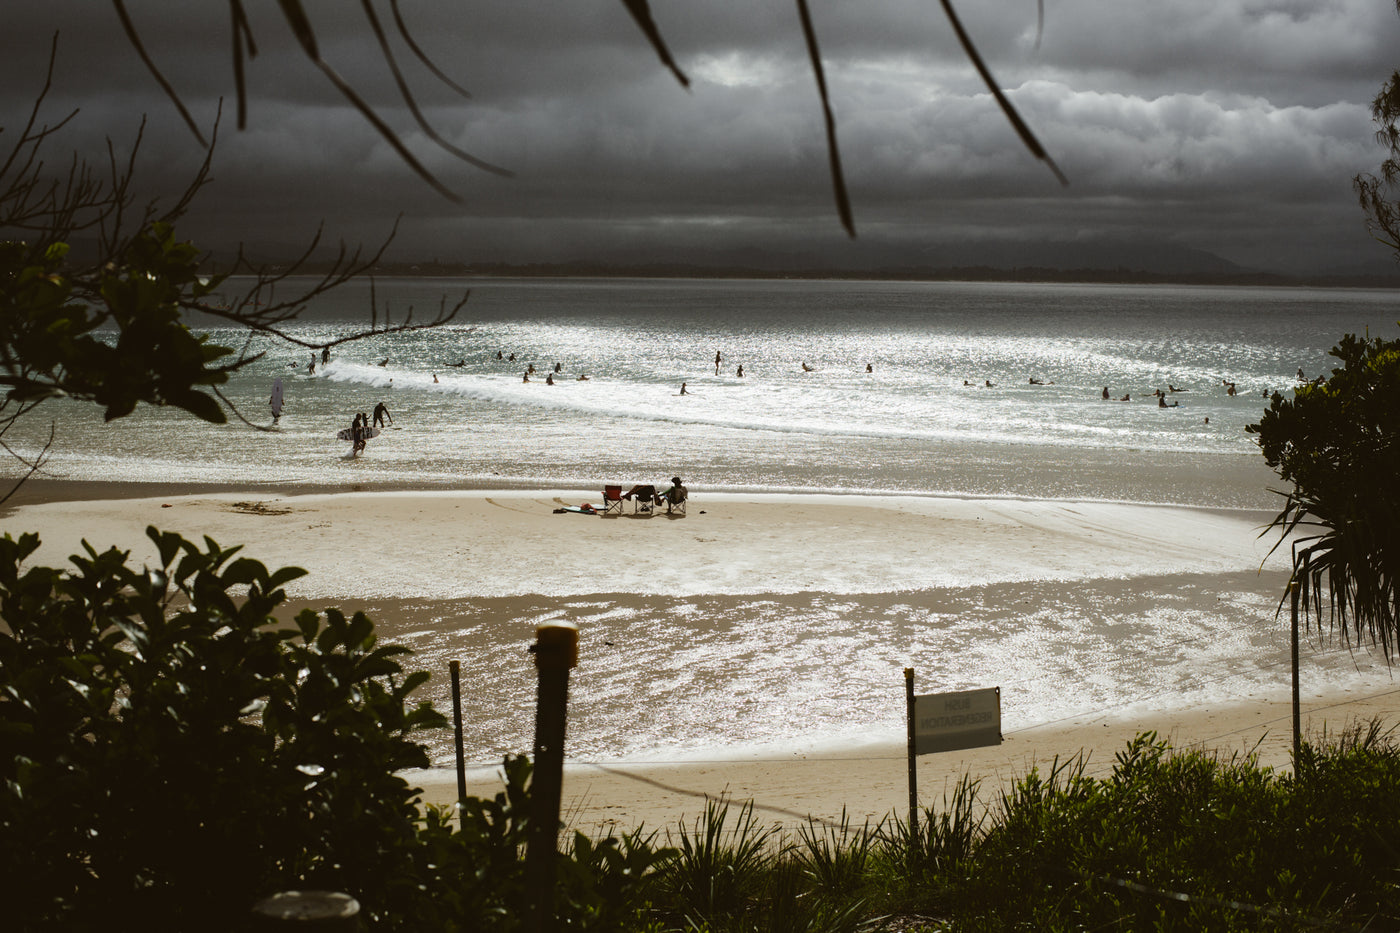 In Between Storm And Shine / Byron Bay, New South Wales, Australia